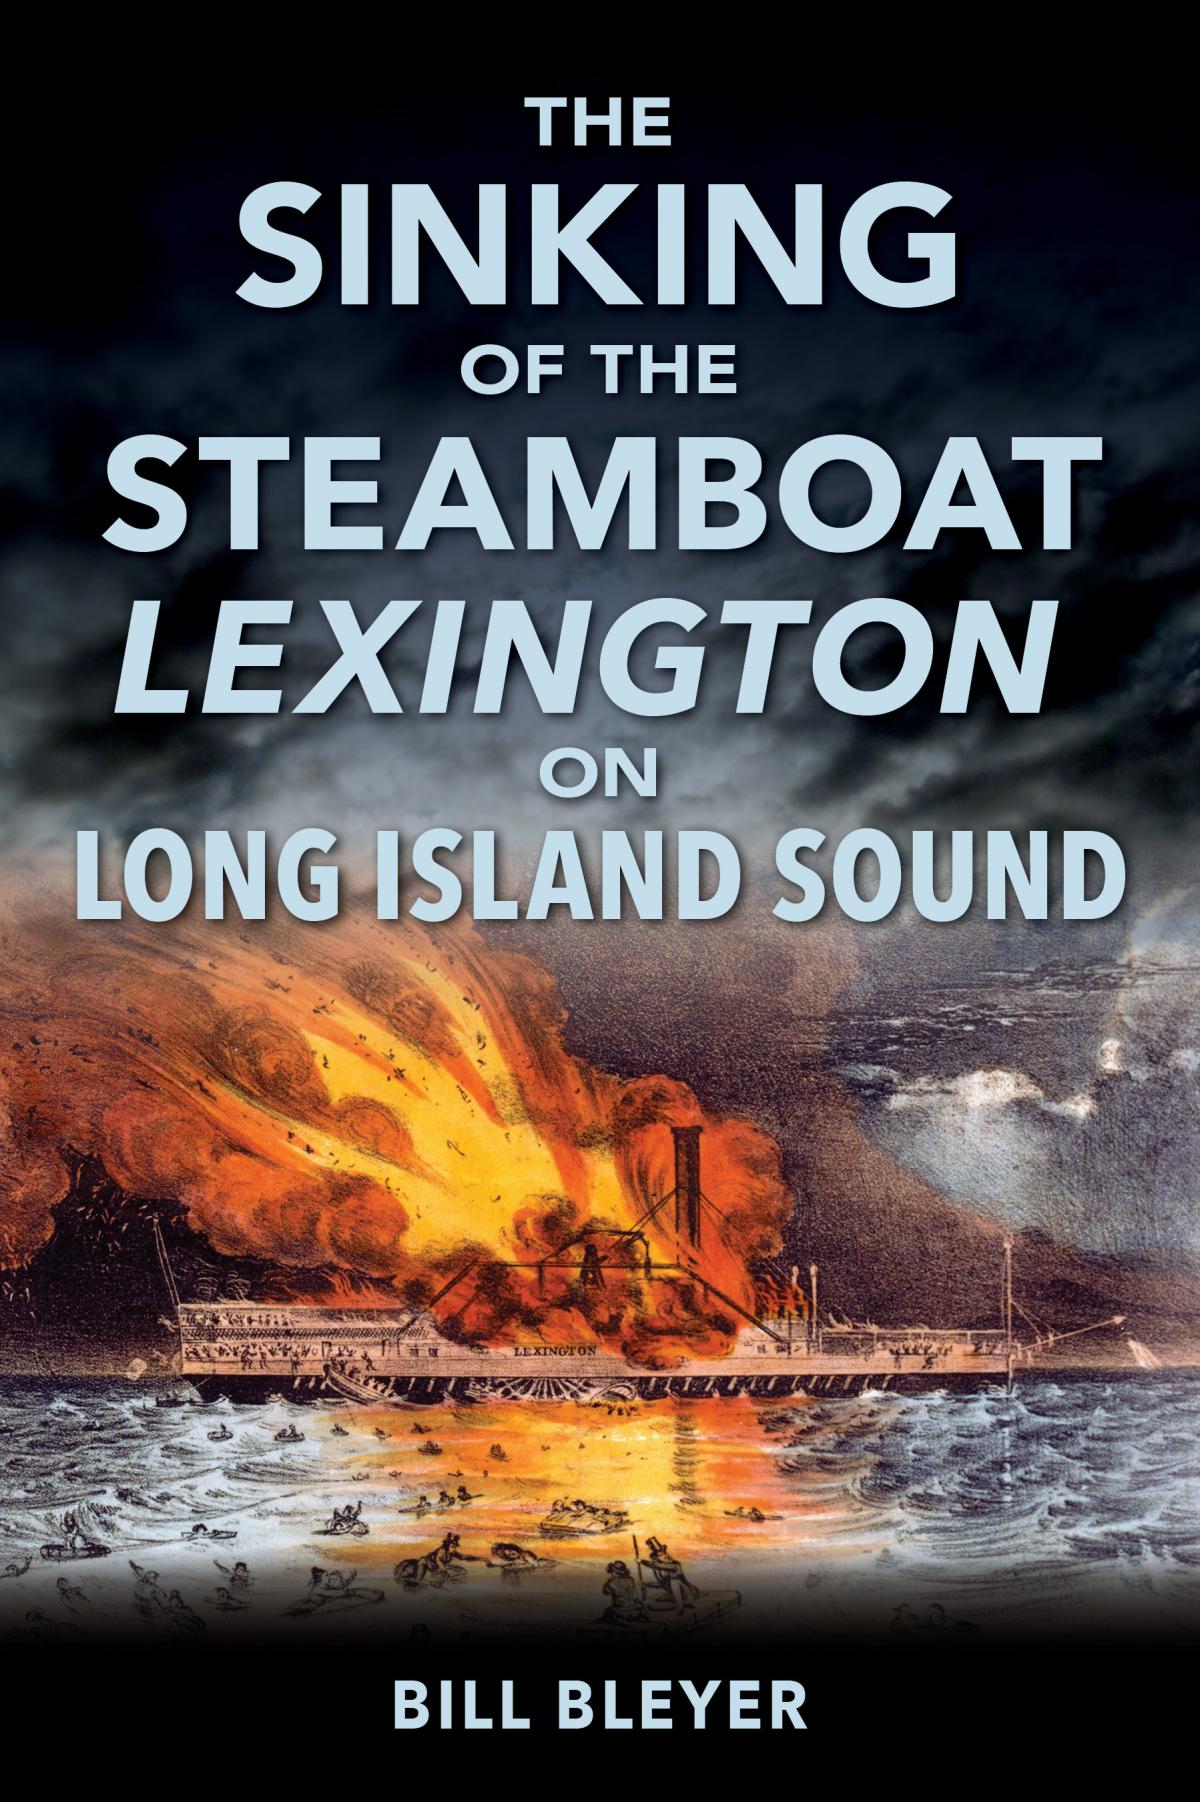 The cover of the book, The Sinking of the Steamboat Lexington by Bill Bleyer, featuring an image of a ship on fire on the water.